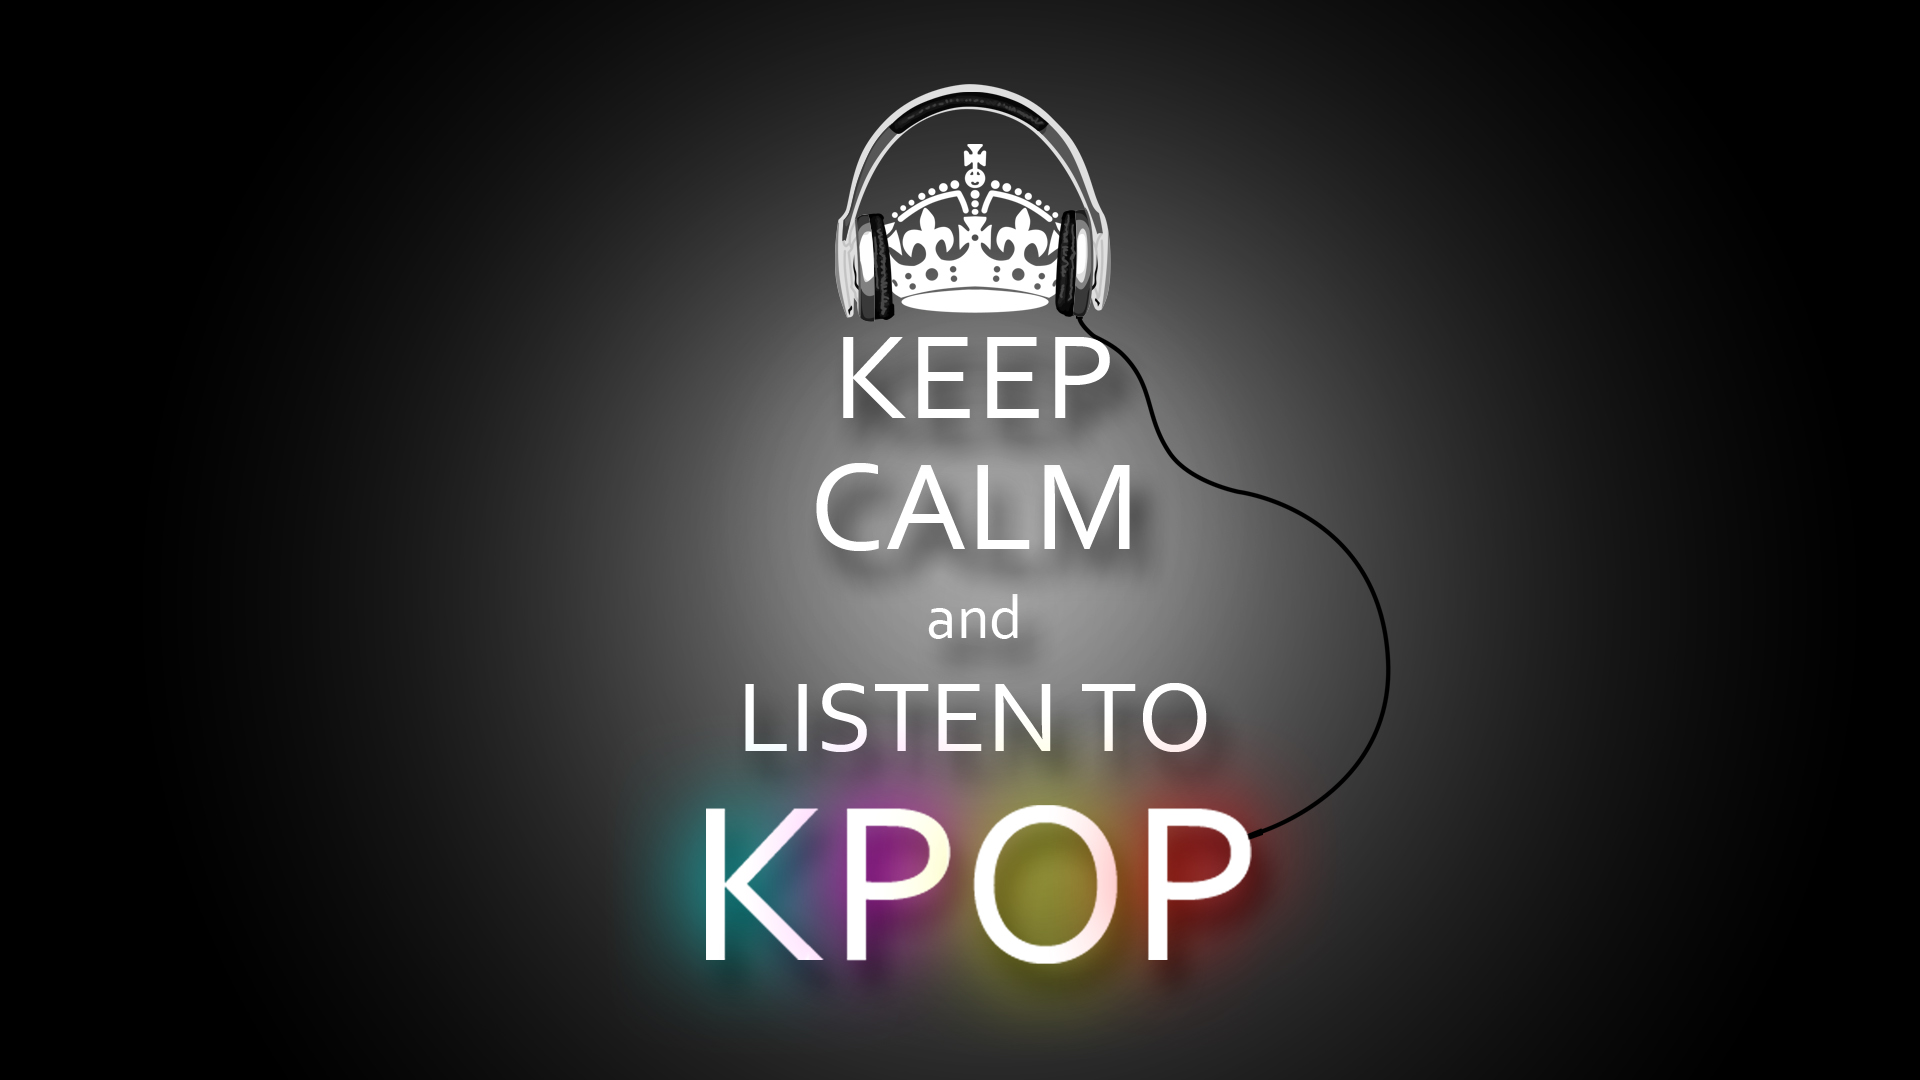 I Love Kpop many words poster for room Paper Print - Music, Quotes &  Motivation posters in India - Buy art, film, design, movie, music, nature  and educational paintings/wallpapers at Flipkart.com